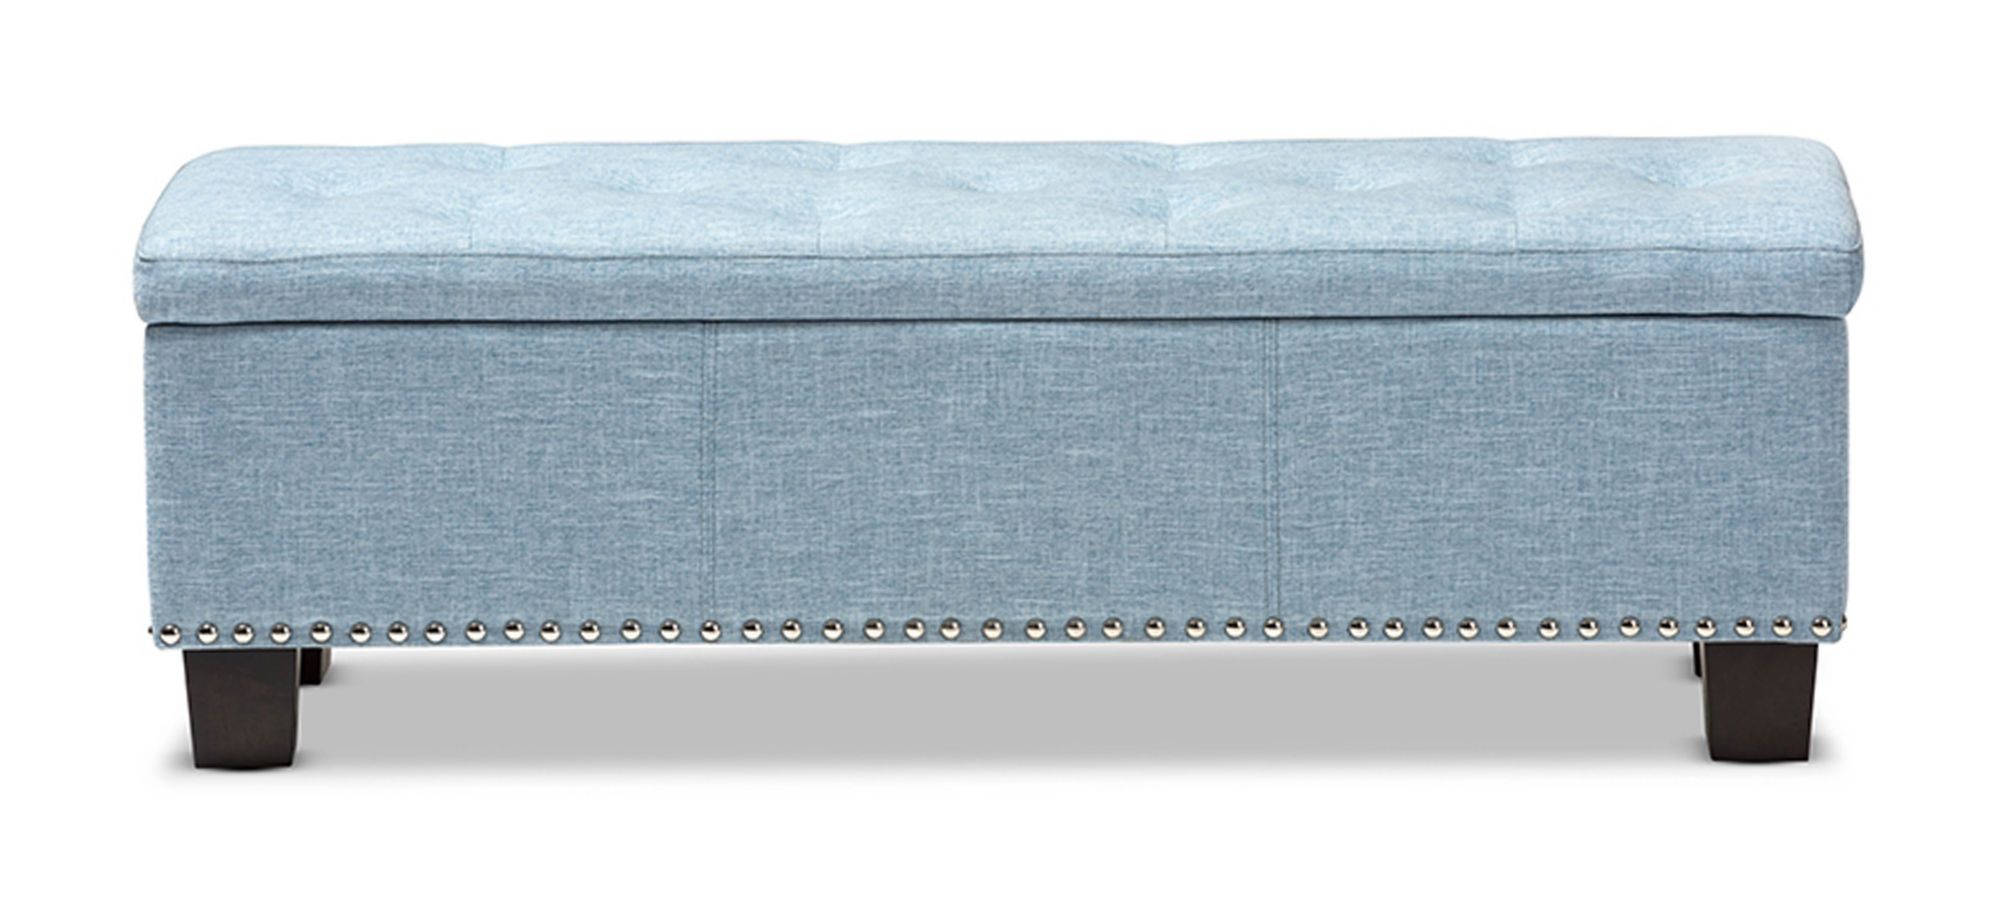 Hannah Storage Ottoman Bench in Light Blue by Wholesale Interiors